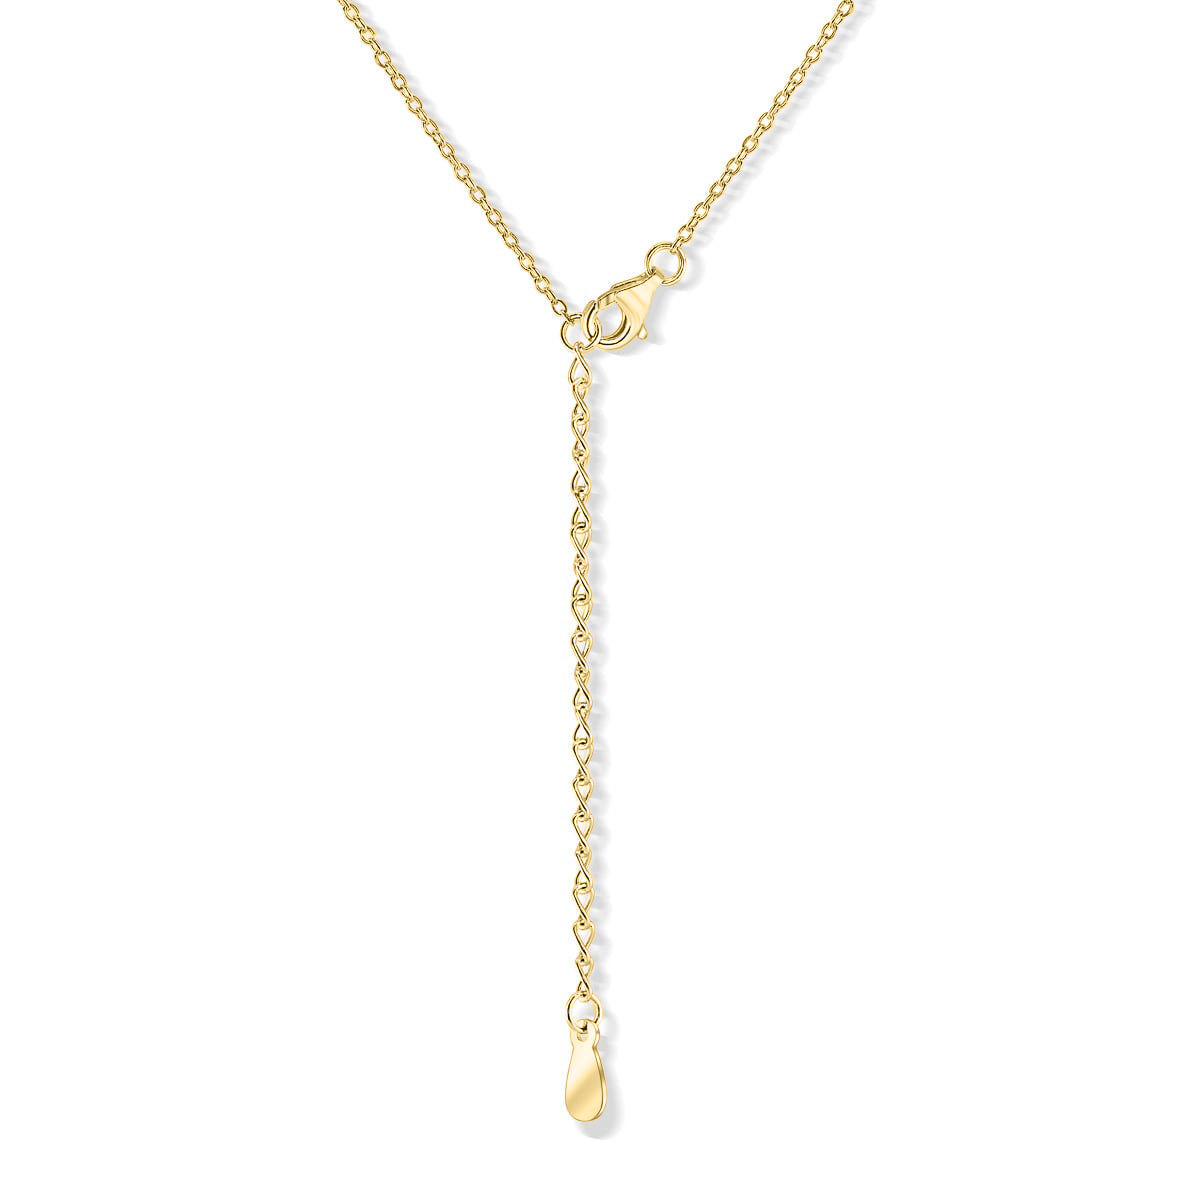 Gold chain lobster clasp